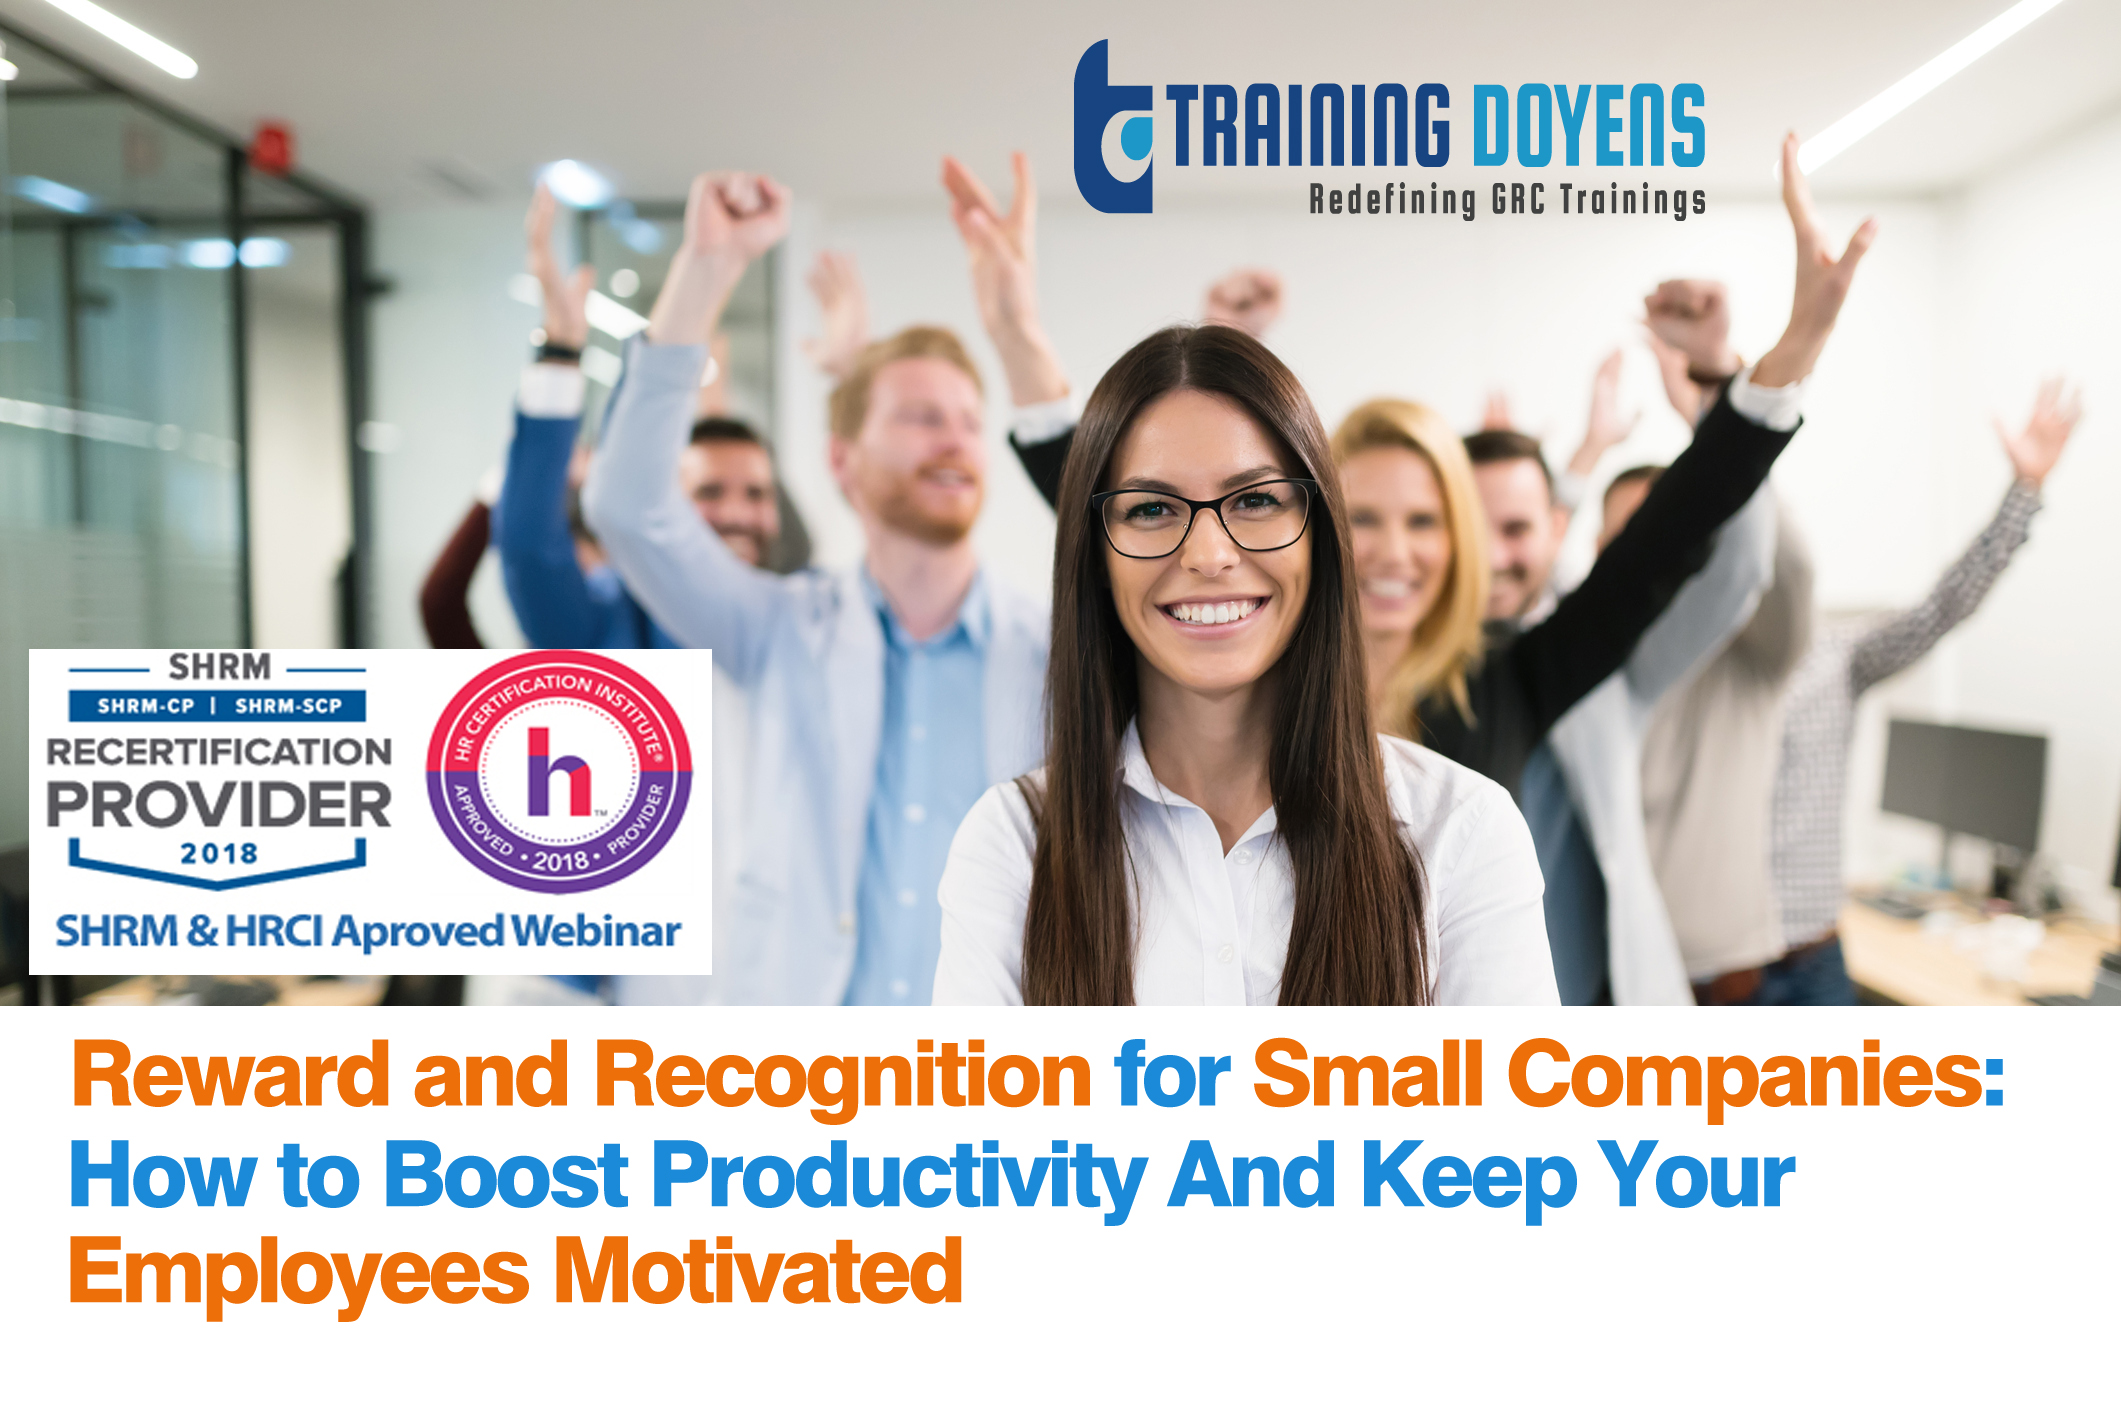 Reward and Recognition for Small Companies: How to Boost Productivity And Keep Your Employees Motivated, Denver, Colorado, United States